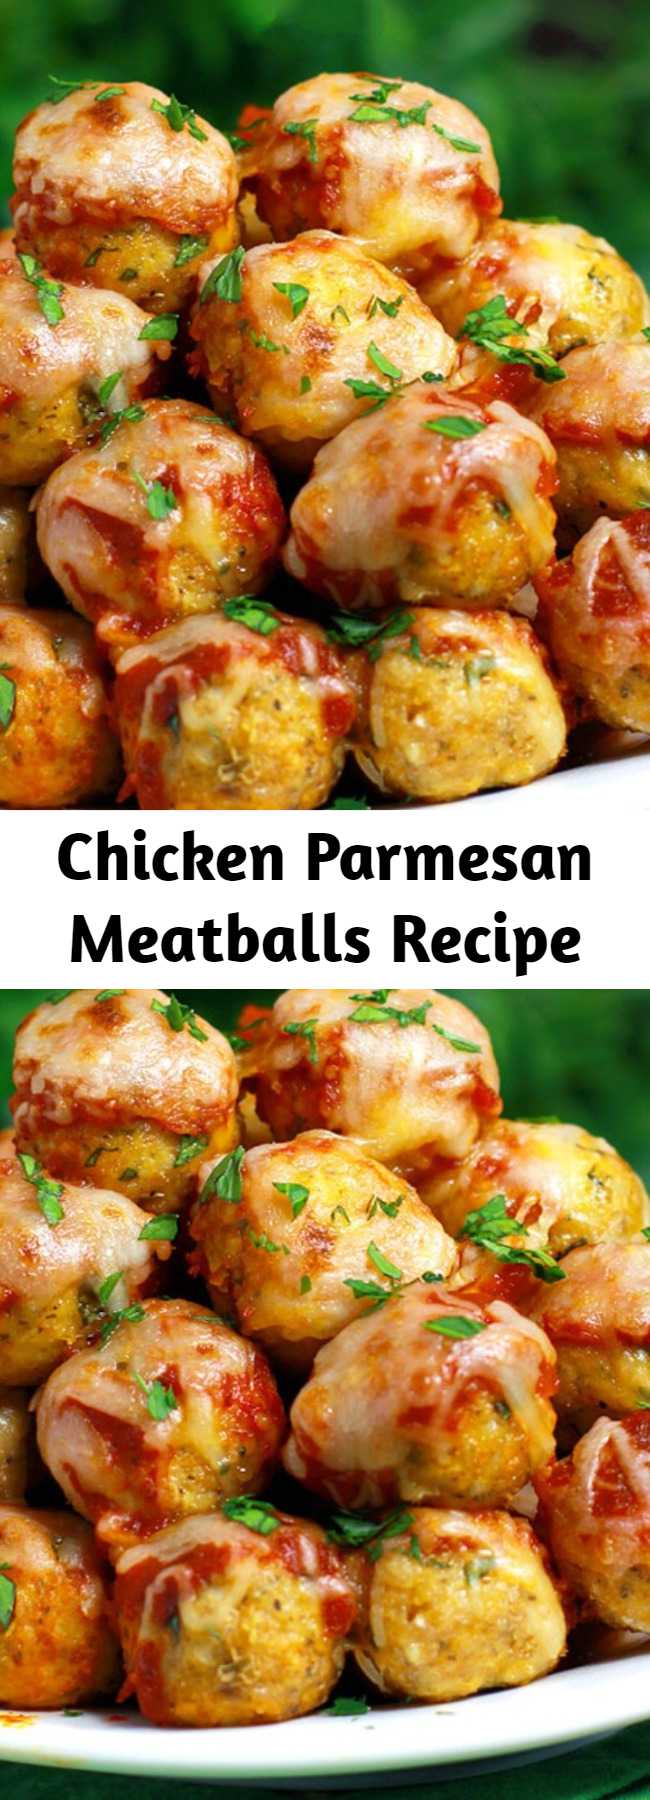 Chicken Parmesan Meatballs Recipe - Chicken Parmesan Meatballs are your favorite chicken Parmesan transformed into these tender and flavorful, saucy baked chicken meatballs.Topped with the perfect blend of ooey gooey cheese. You're going to love 'em! #ChickenParmesan #Meatballs